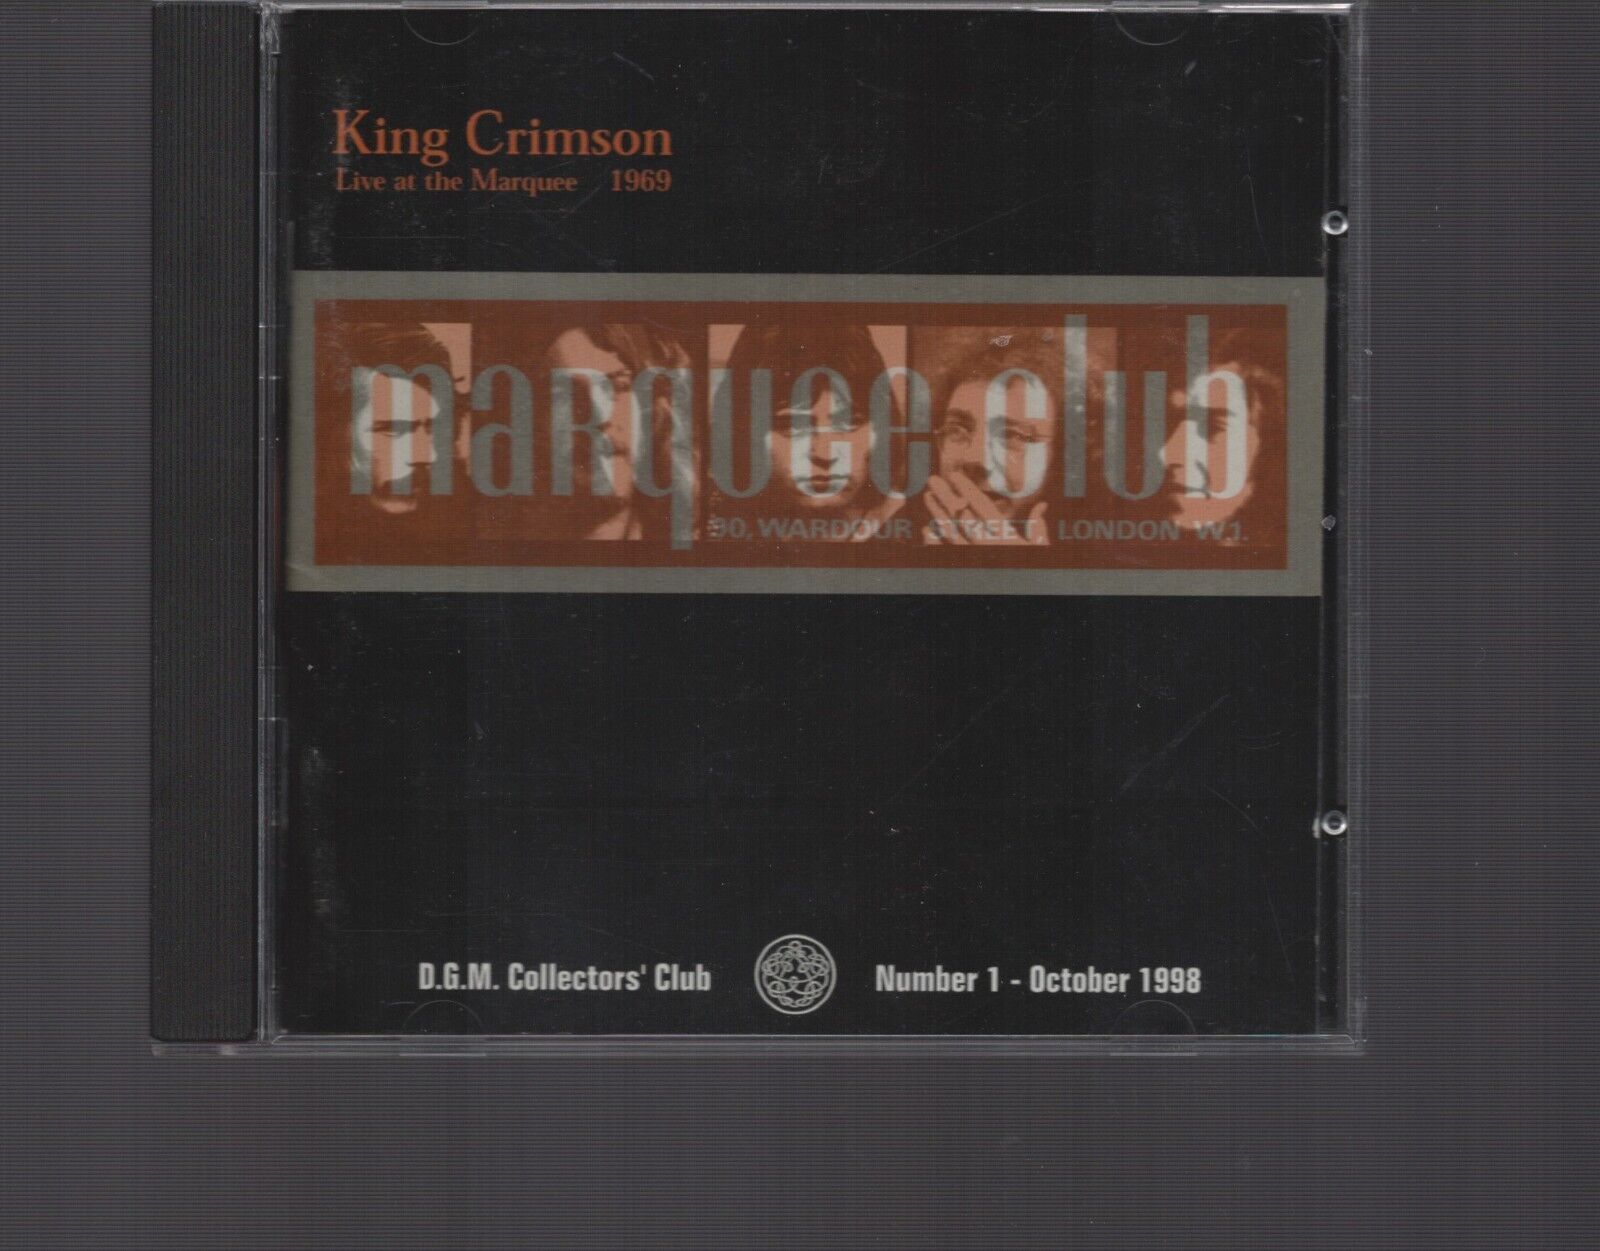 Primary image for King Crimson / Live At The Marquee 1969 / CD / DMG Collectors Club 1 / 1998